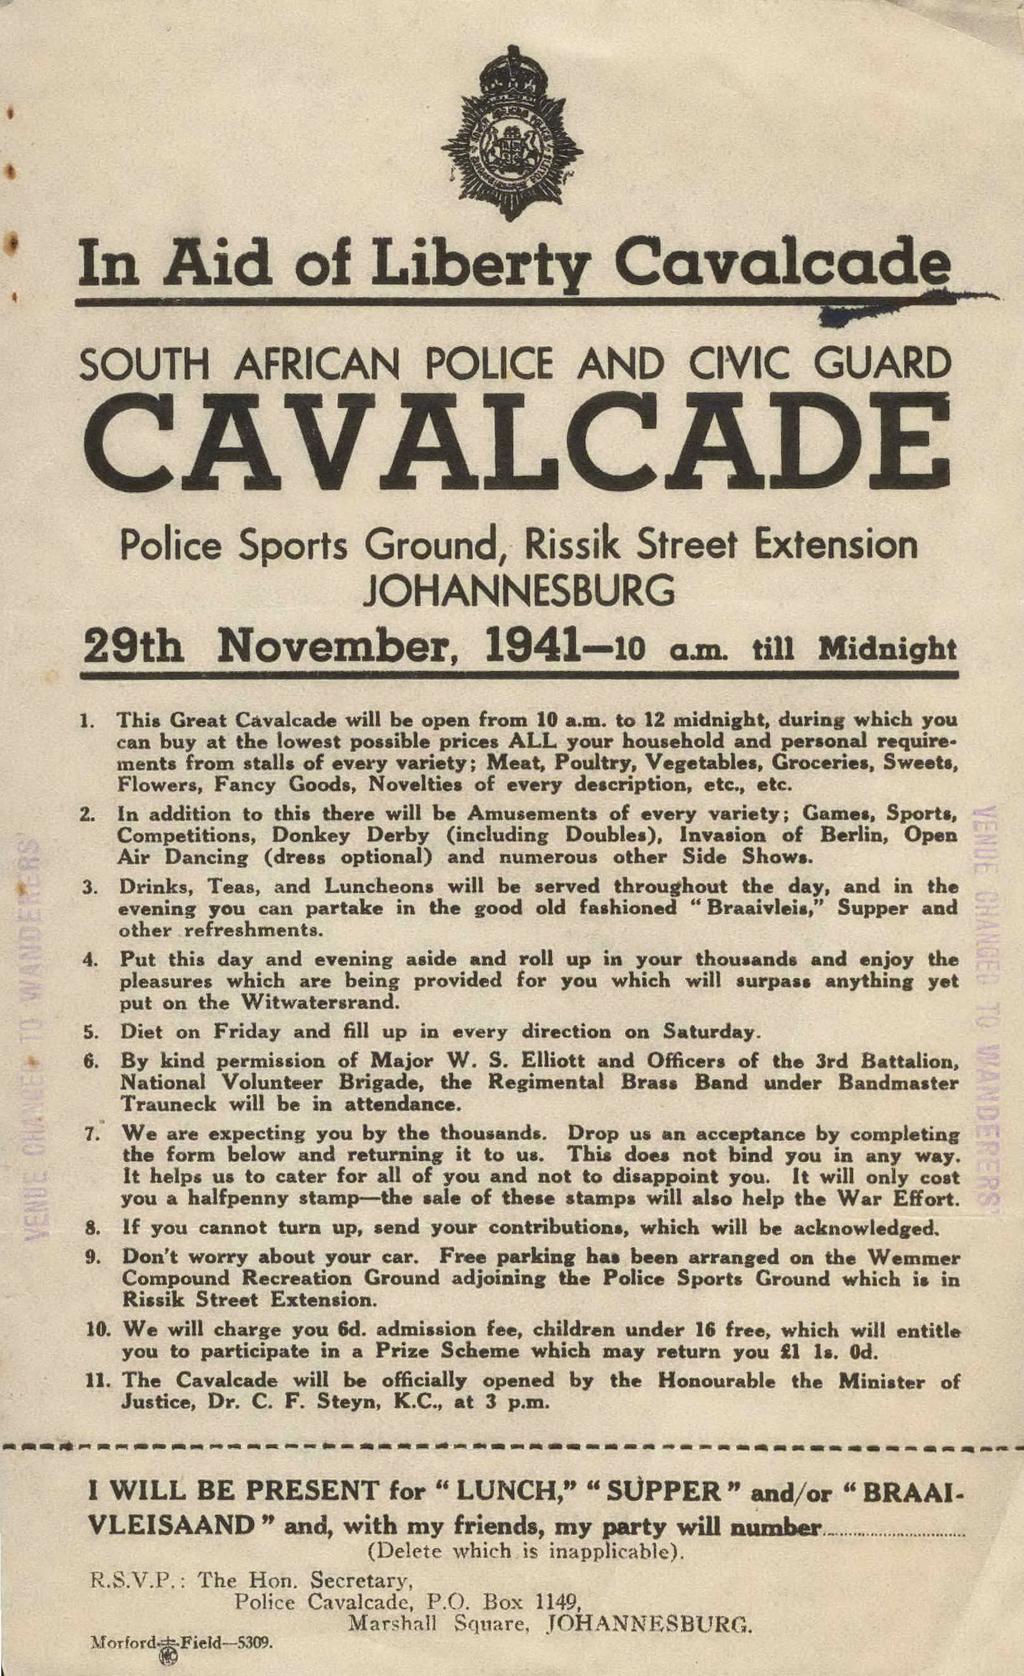 SOUTH AFRICAN POLICE AND CIVIC GUARD CAVALCADE Police Sports Ground, Rissik Street Extension JOHANNESBURG 2 9 th N o v e m b e r, 1941 10 cun, tin Midnight 1.